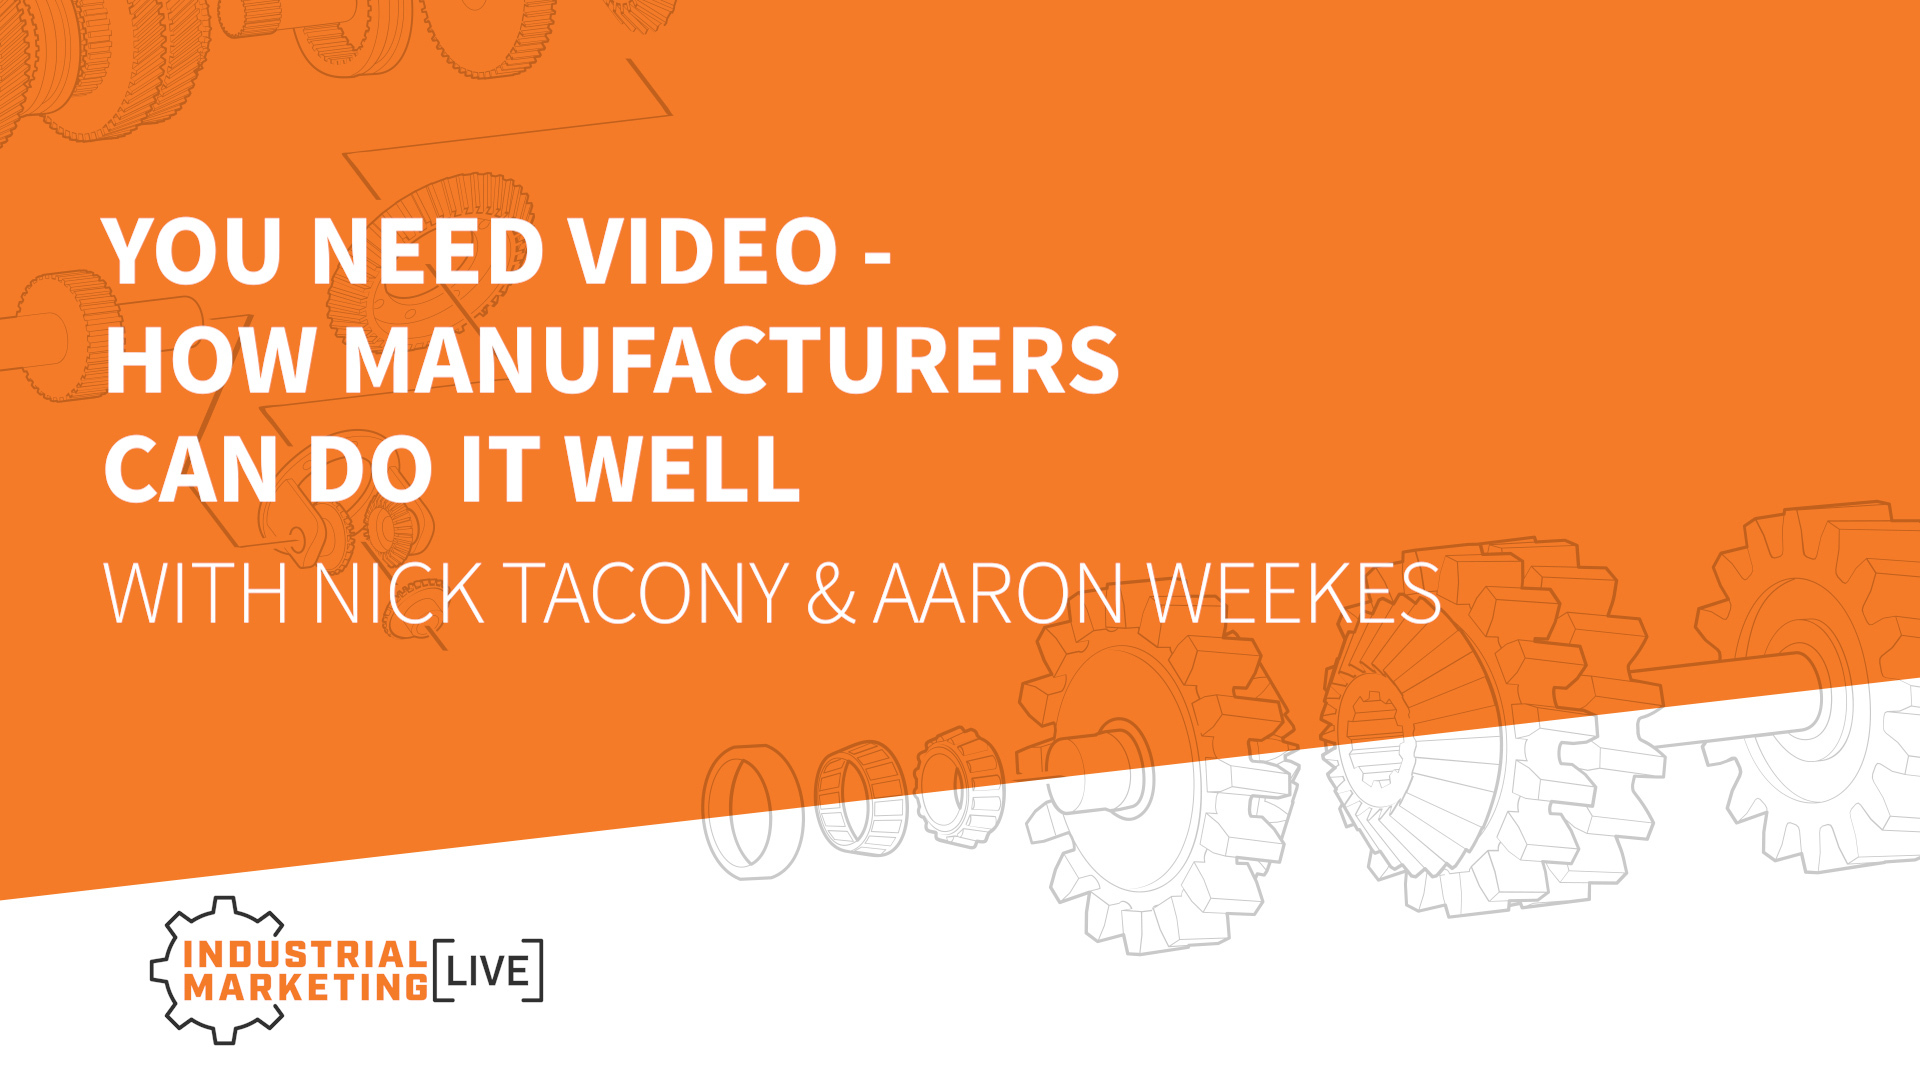 You need video: how manufacturers can do it well